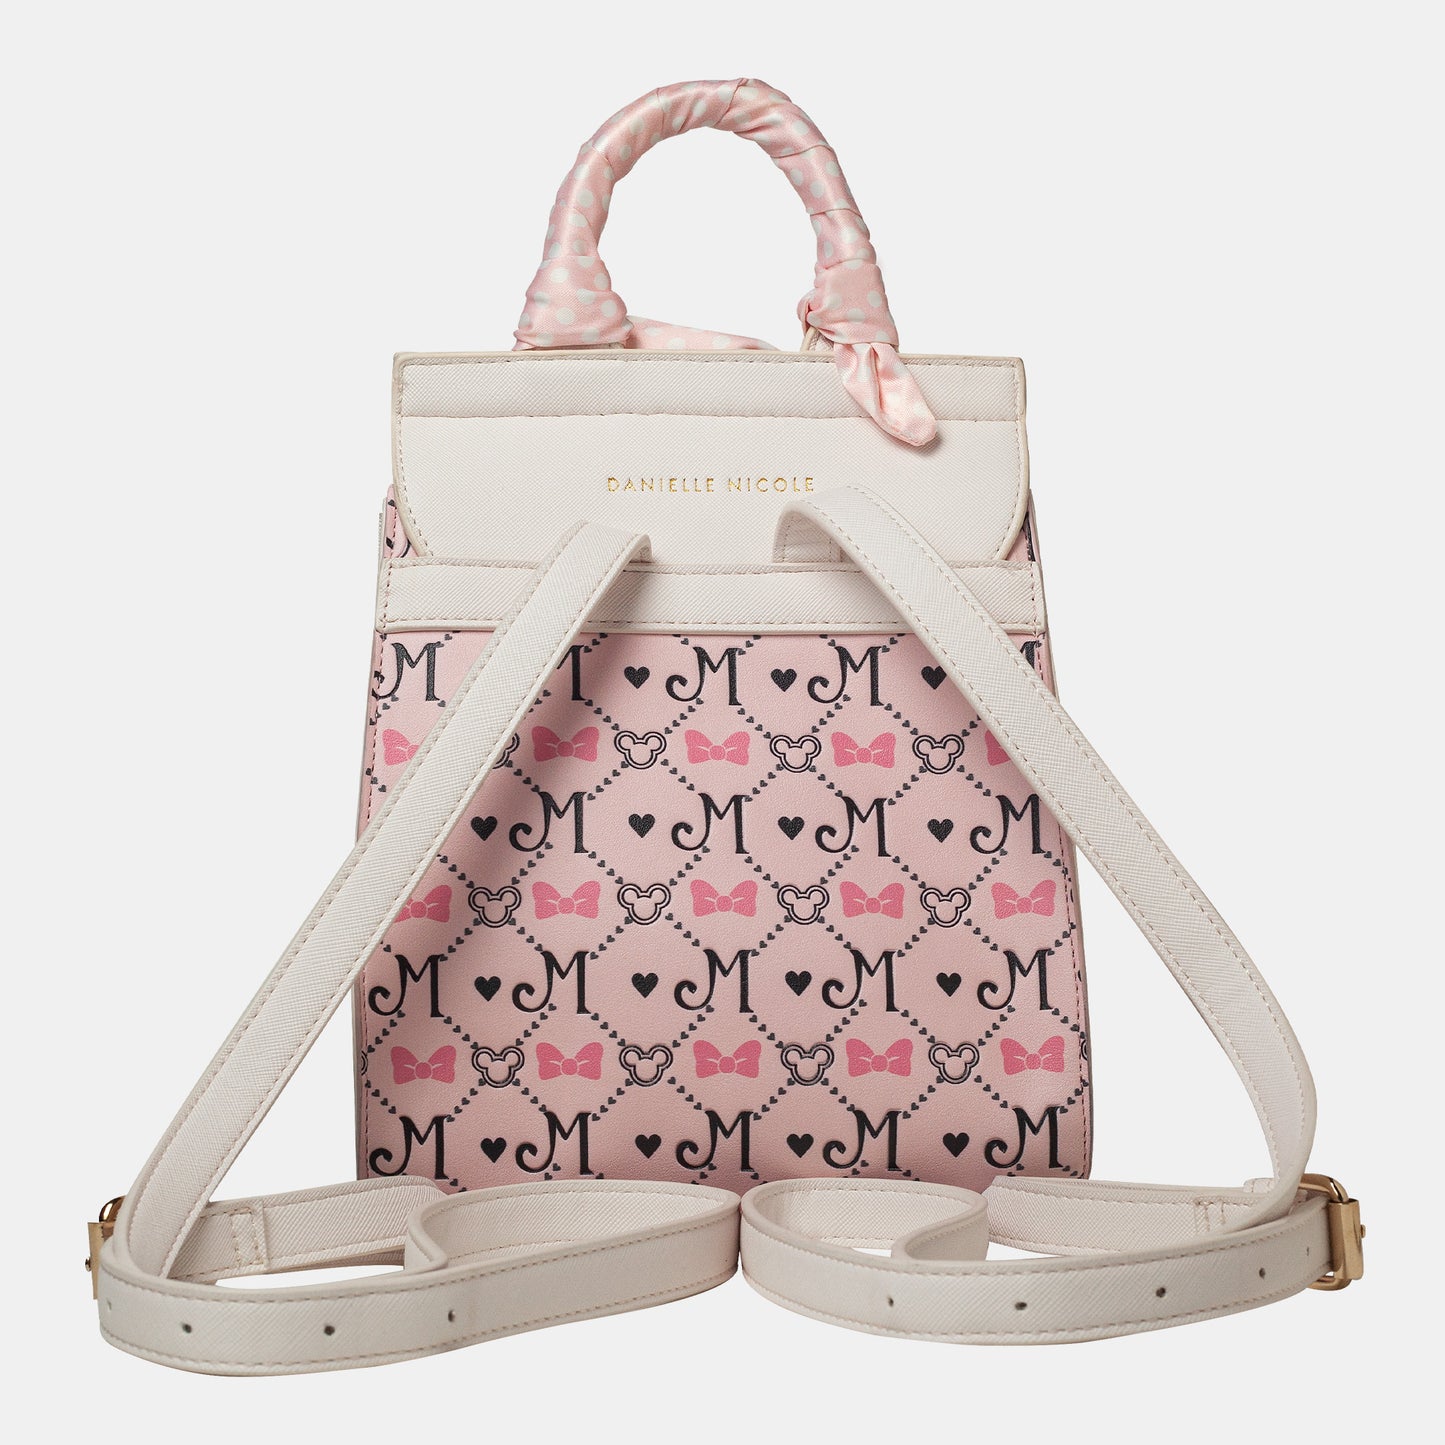 Disney Minnie Mouse Monogram Mini Backpack with Handle by Danielle Nicole